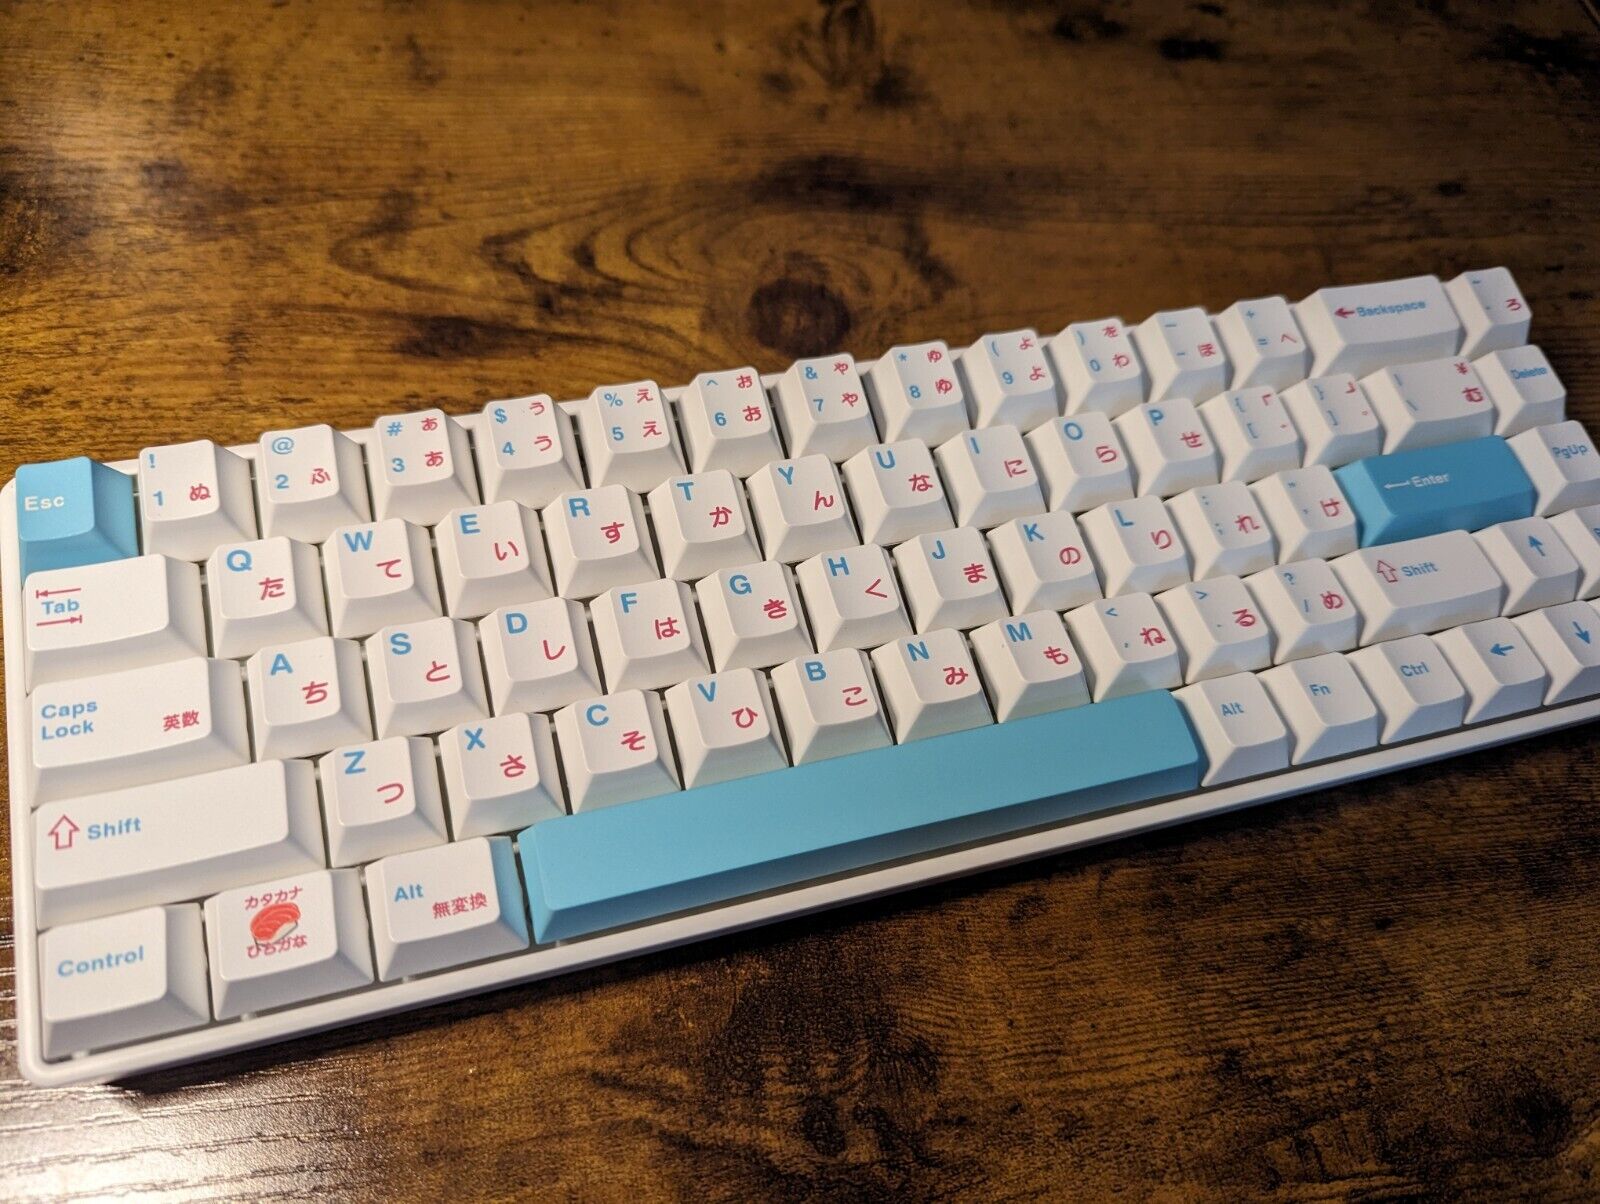 Custom modded budget mechanical keyboard CIY 68 blue white thocky hot-swappable